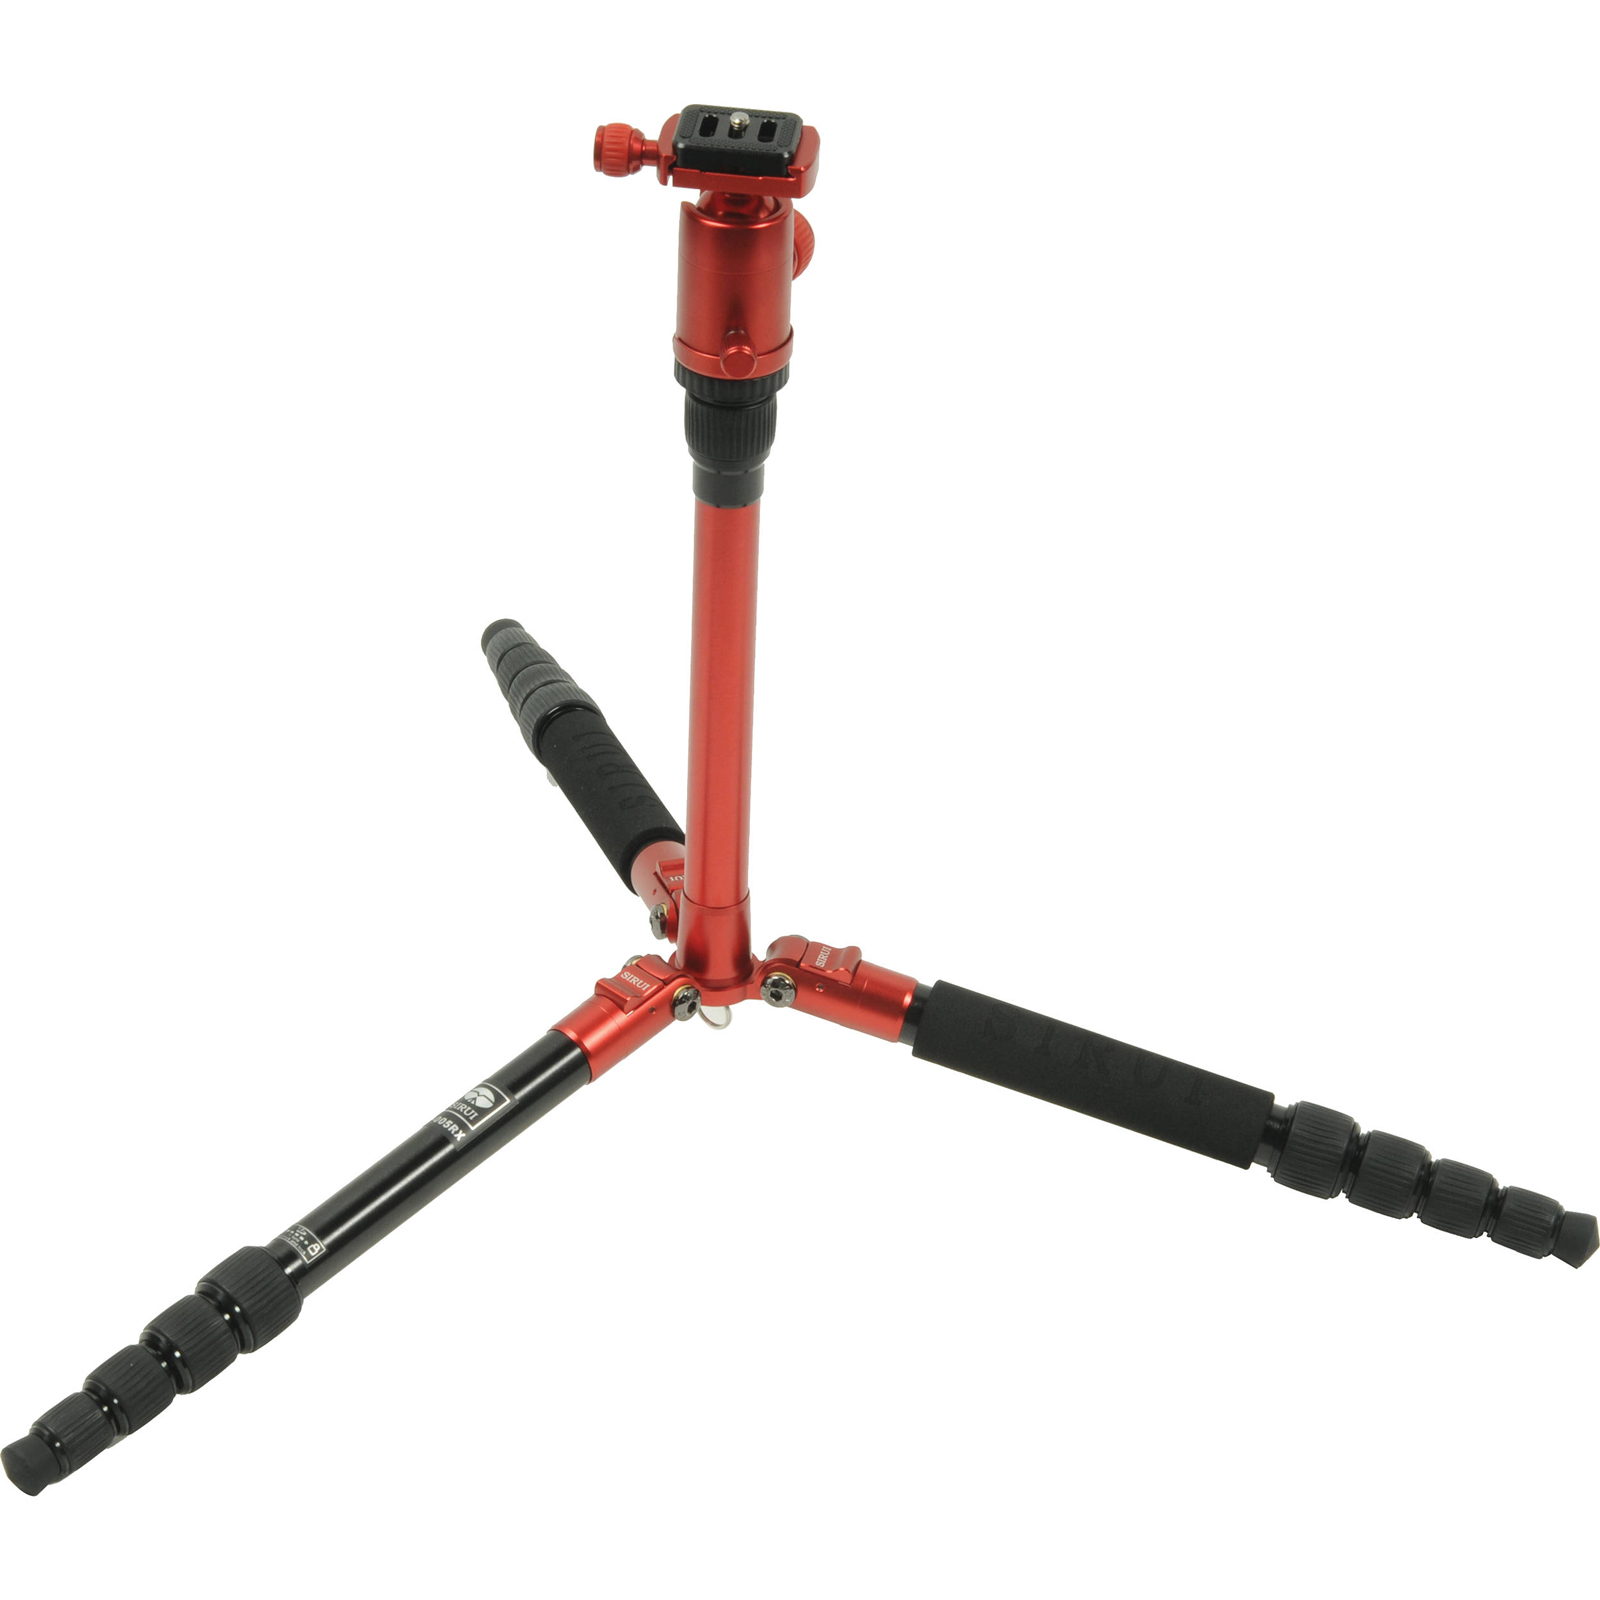 Sirui T-005X 54" Aluminum Alloy Tripod with C-10X Ball Head & Case (Red) - image 4 of 4